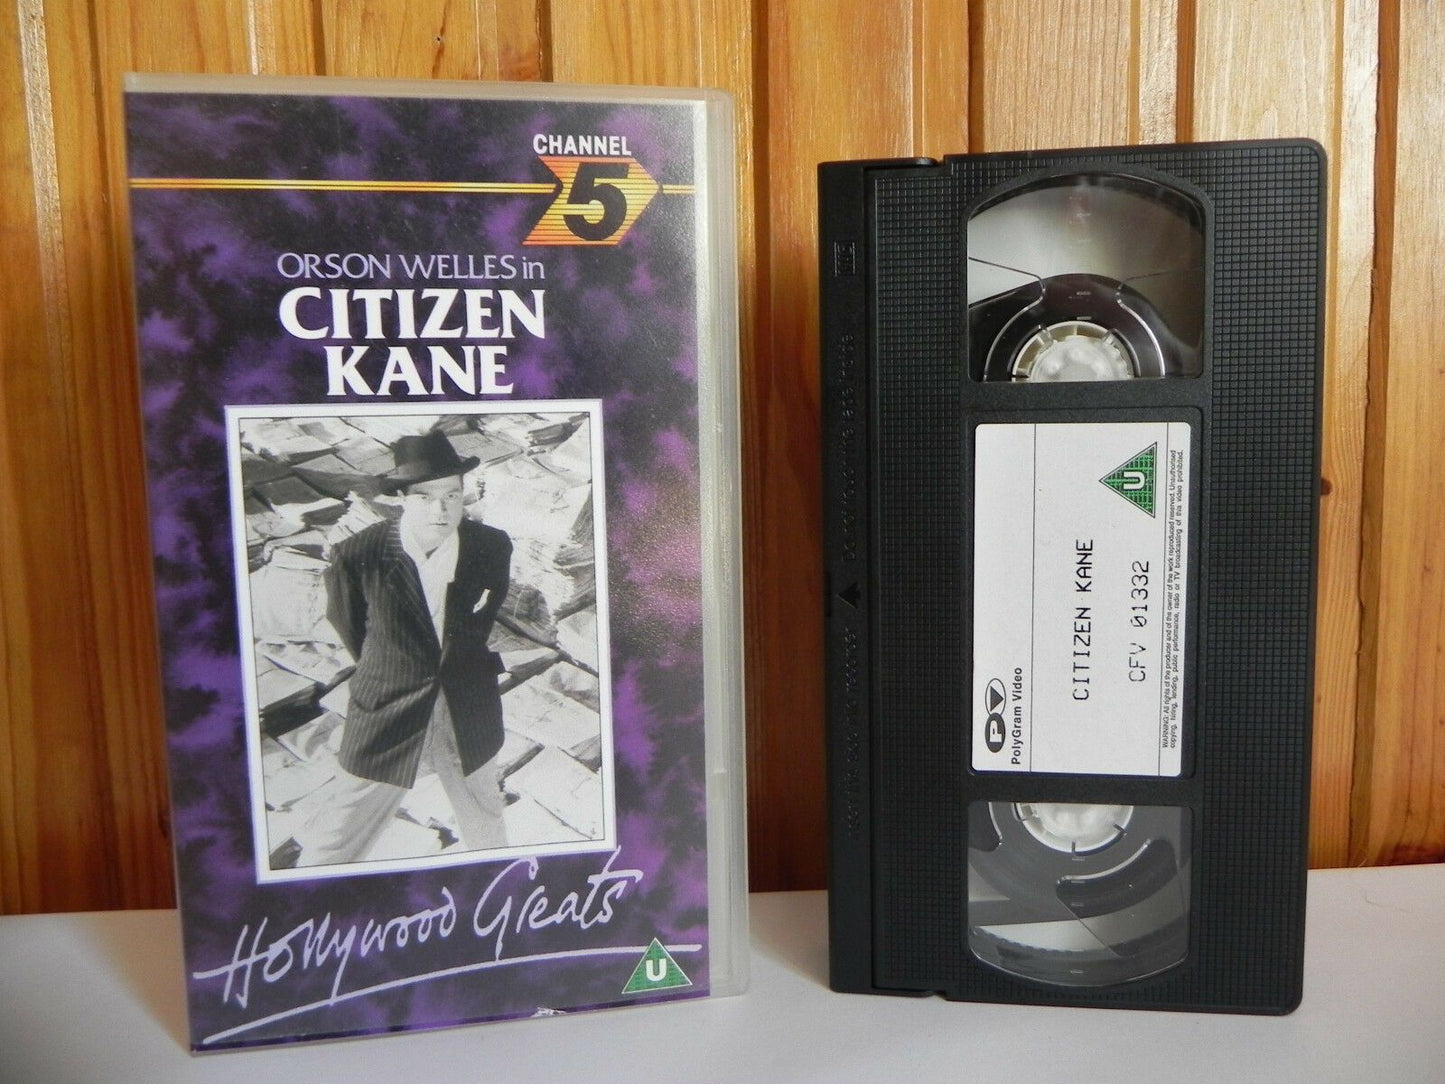 Citizen Kane - Channel 5 - Drama - Hollywood Greats - Orsen Welles - Pal VHS-